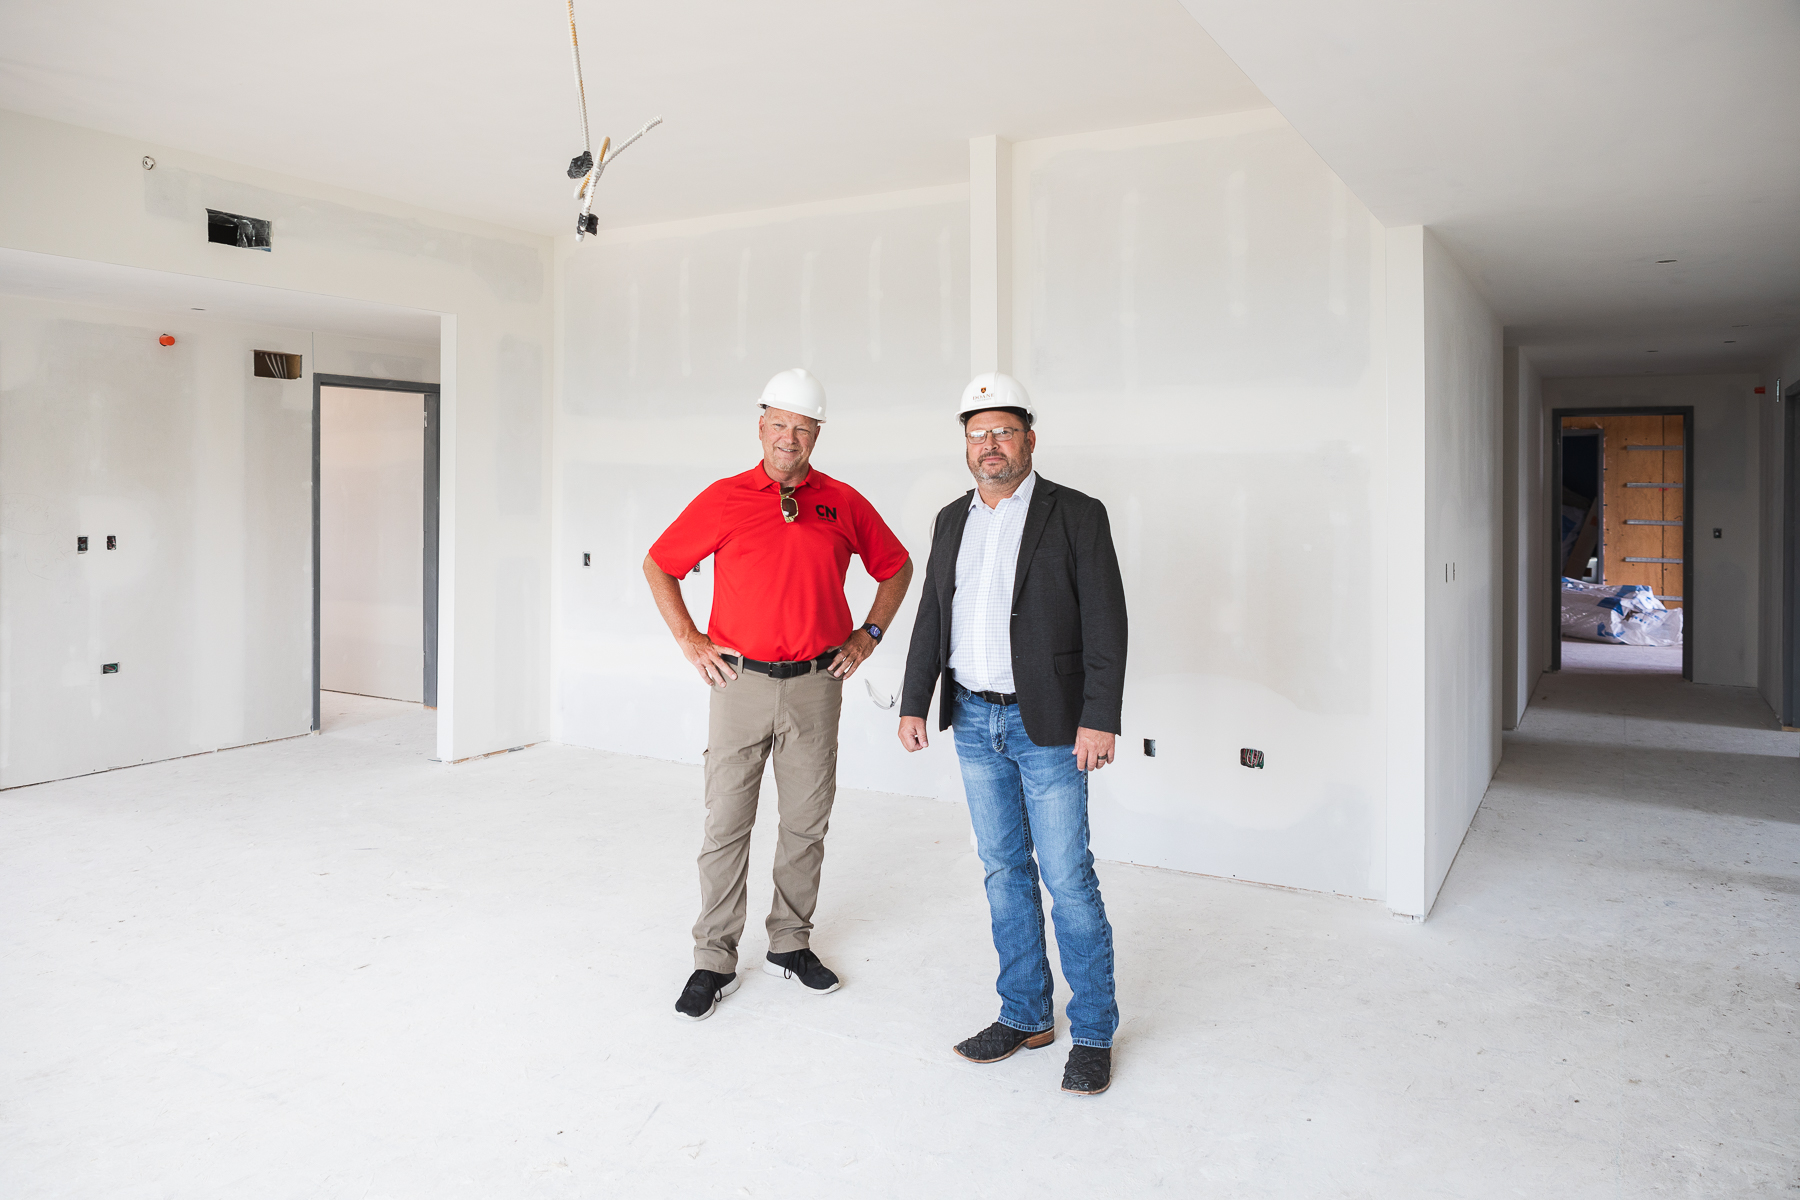 Kevin Zadina, publisher of the Crete News, stands to the left of Brian Flesner during a tour for the news publication of Doane's new residence hall. The two stand in what will be the kitchenette and living space of one of the six eight-person suites located in the residence hall. 